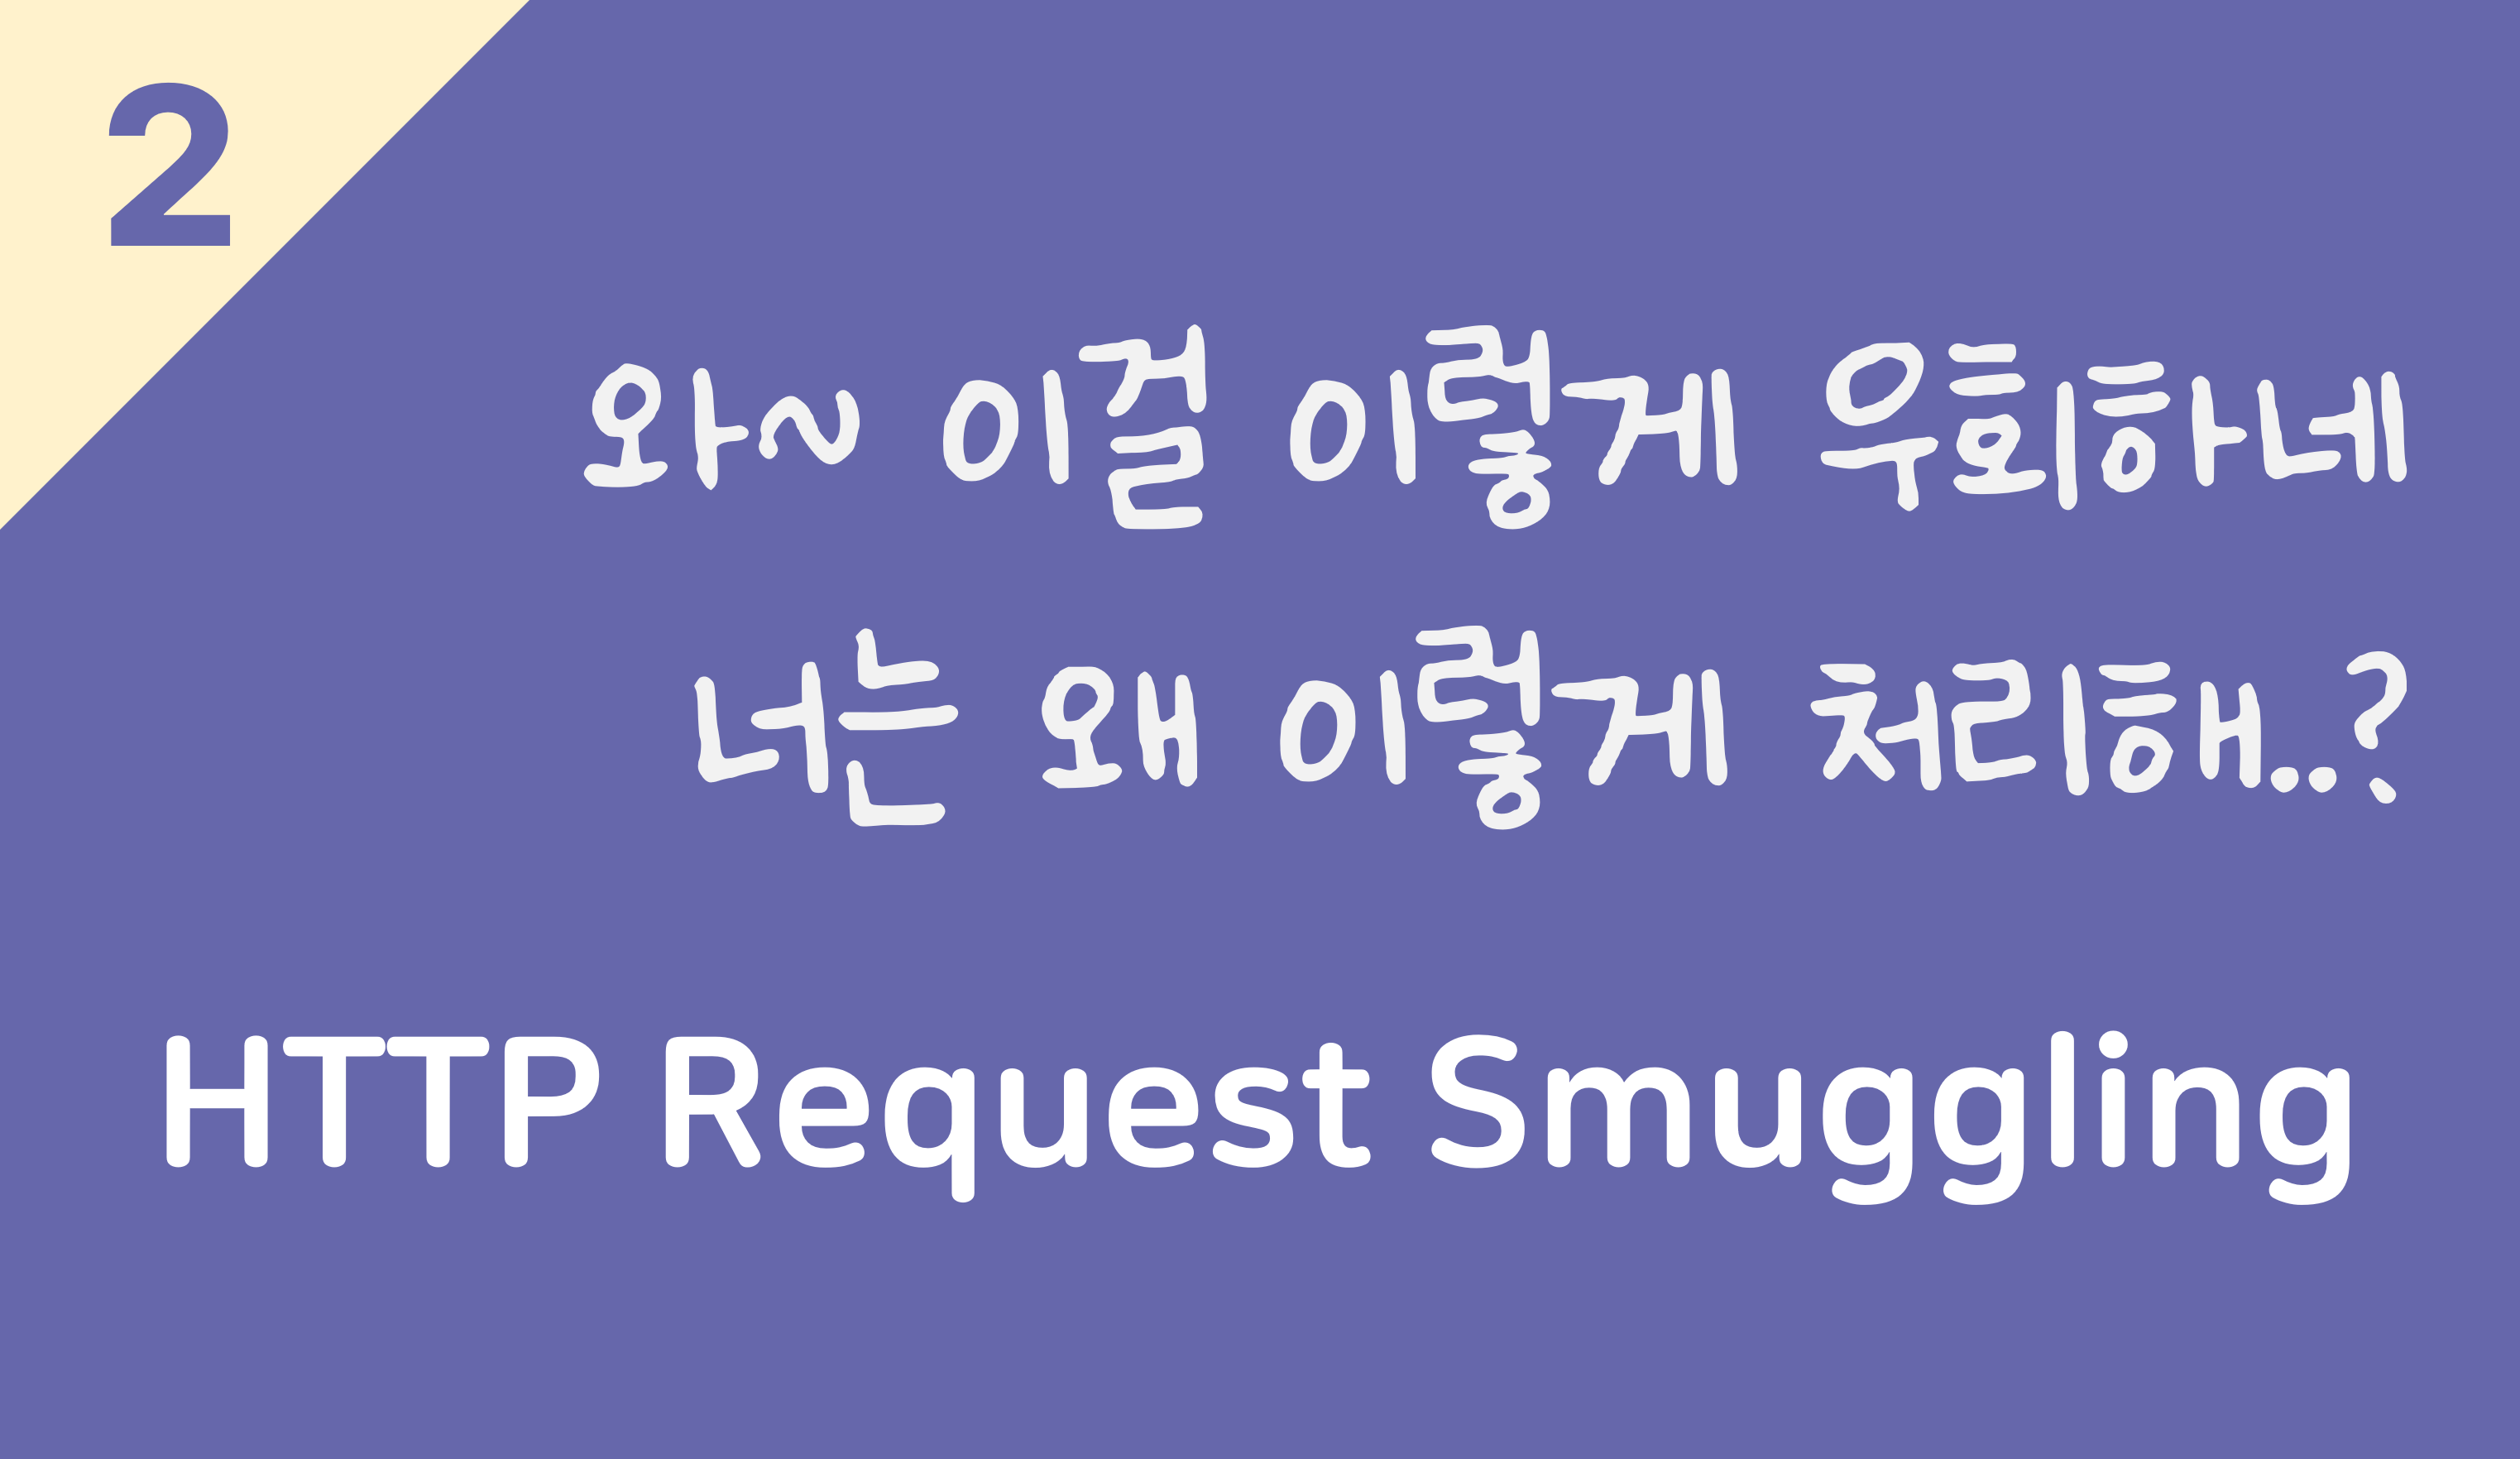 [Research] 재밌는 HTTP Request Smuggling 이야기 (2)